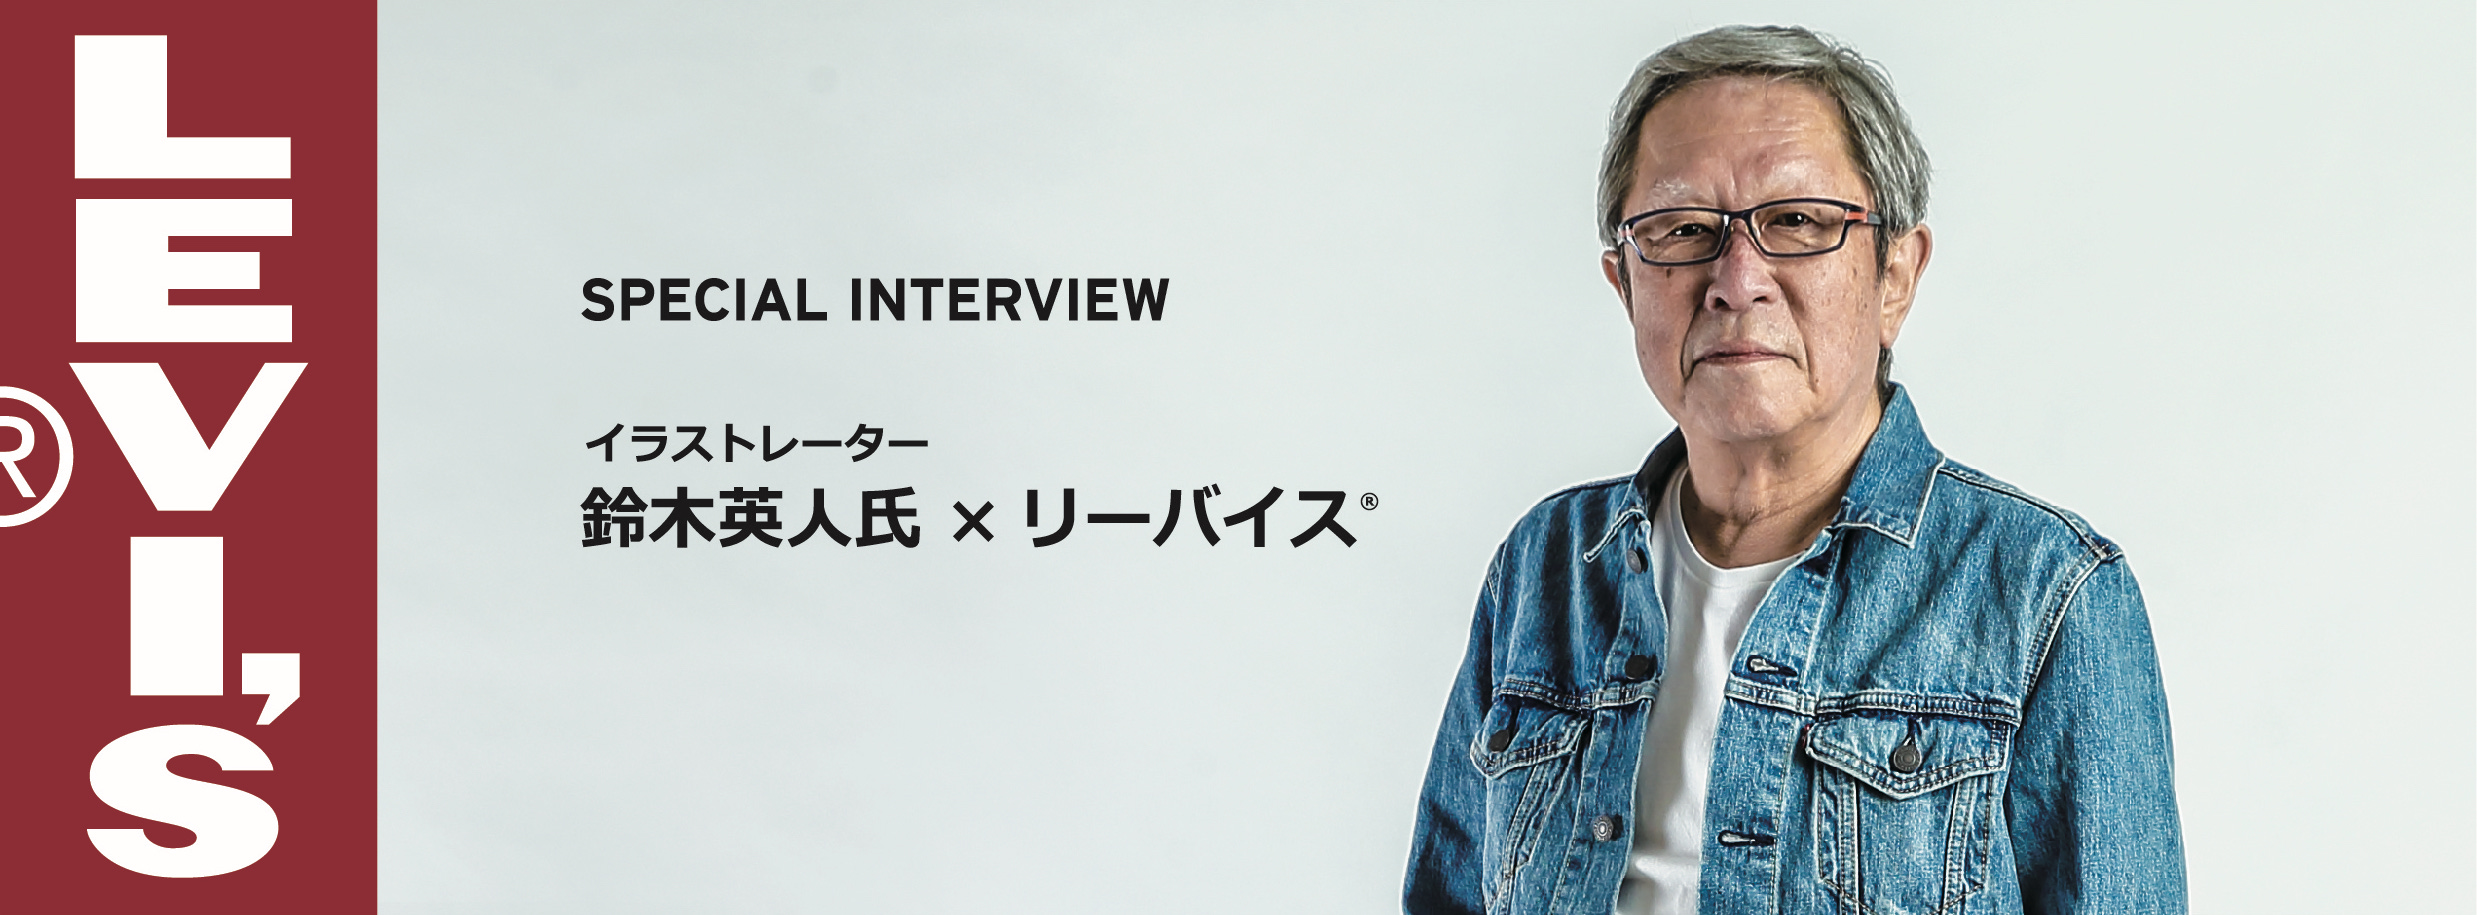 Special Interview イラストレーター 鈴木英人氏 Levi S リーバイス 公式通販